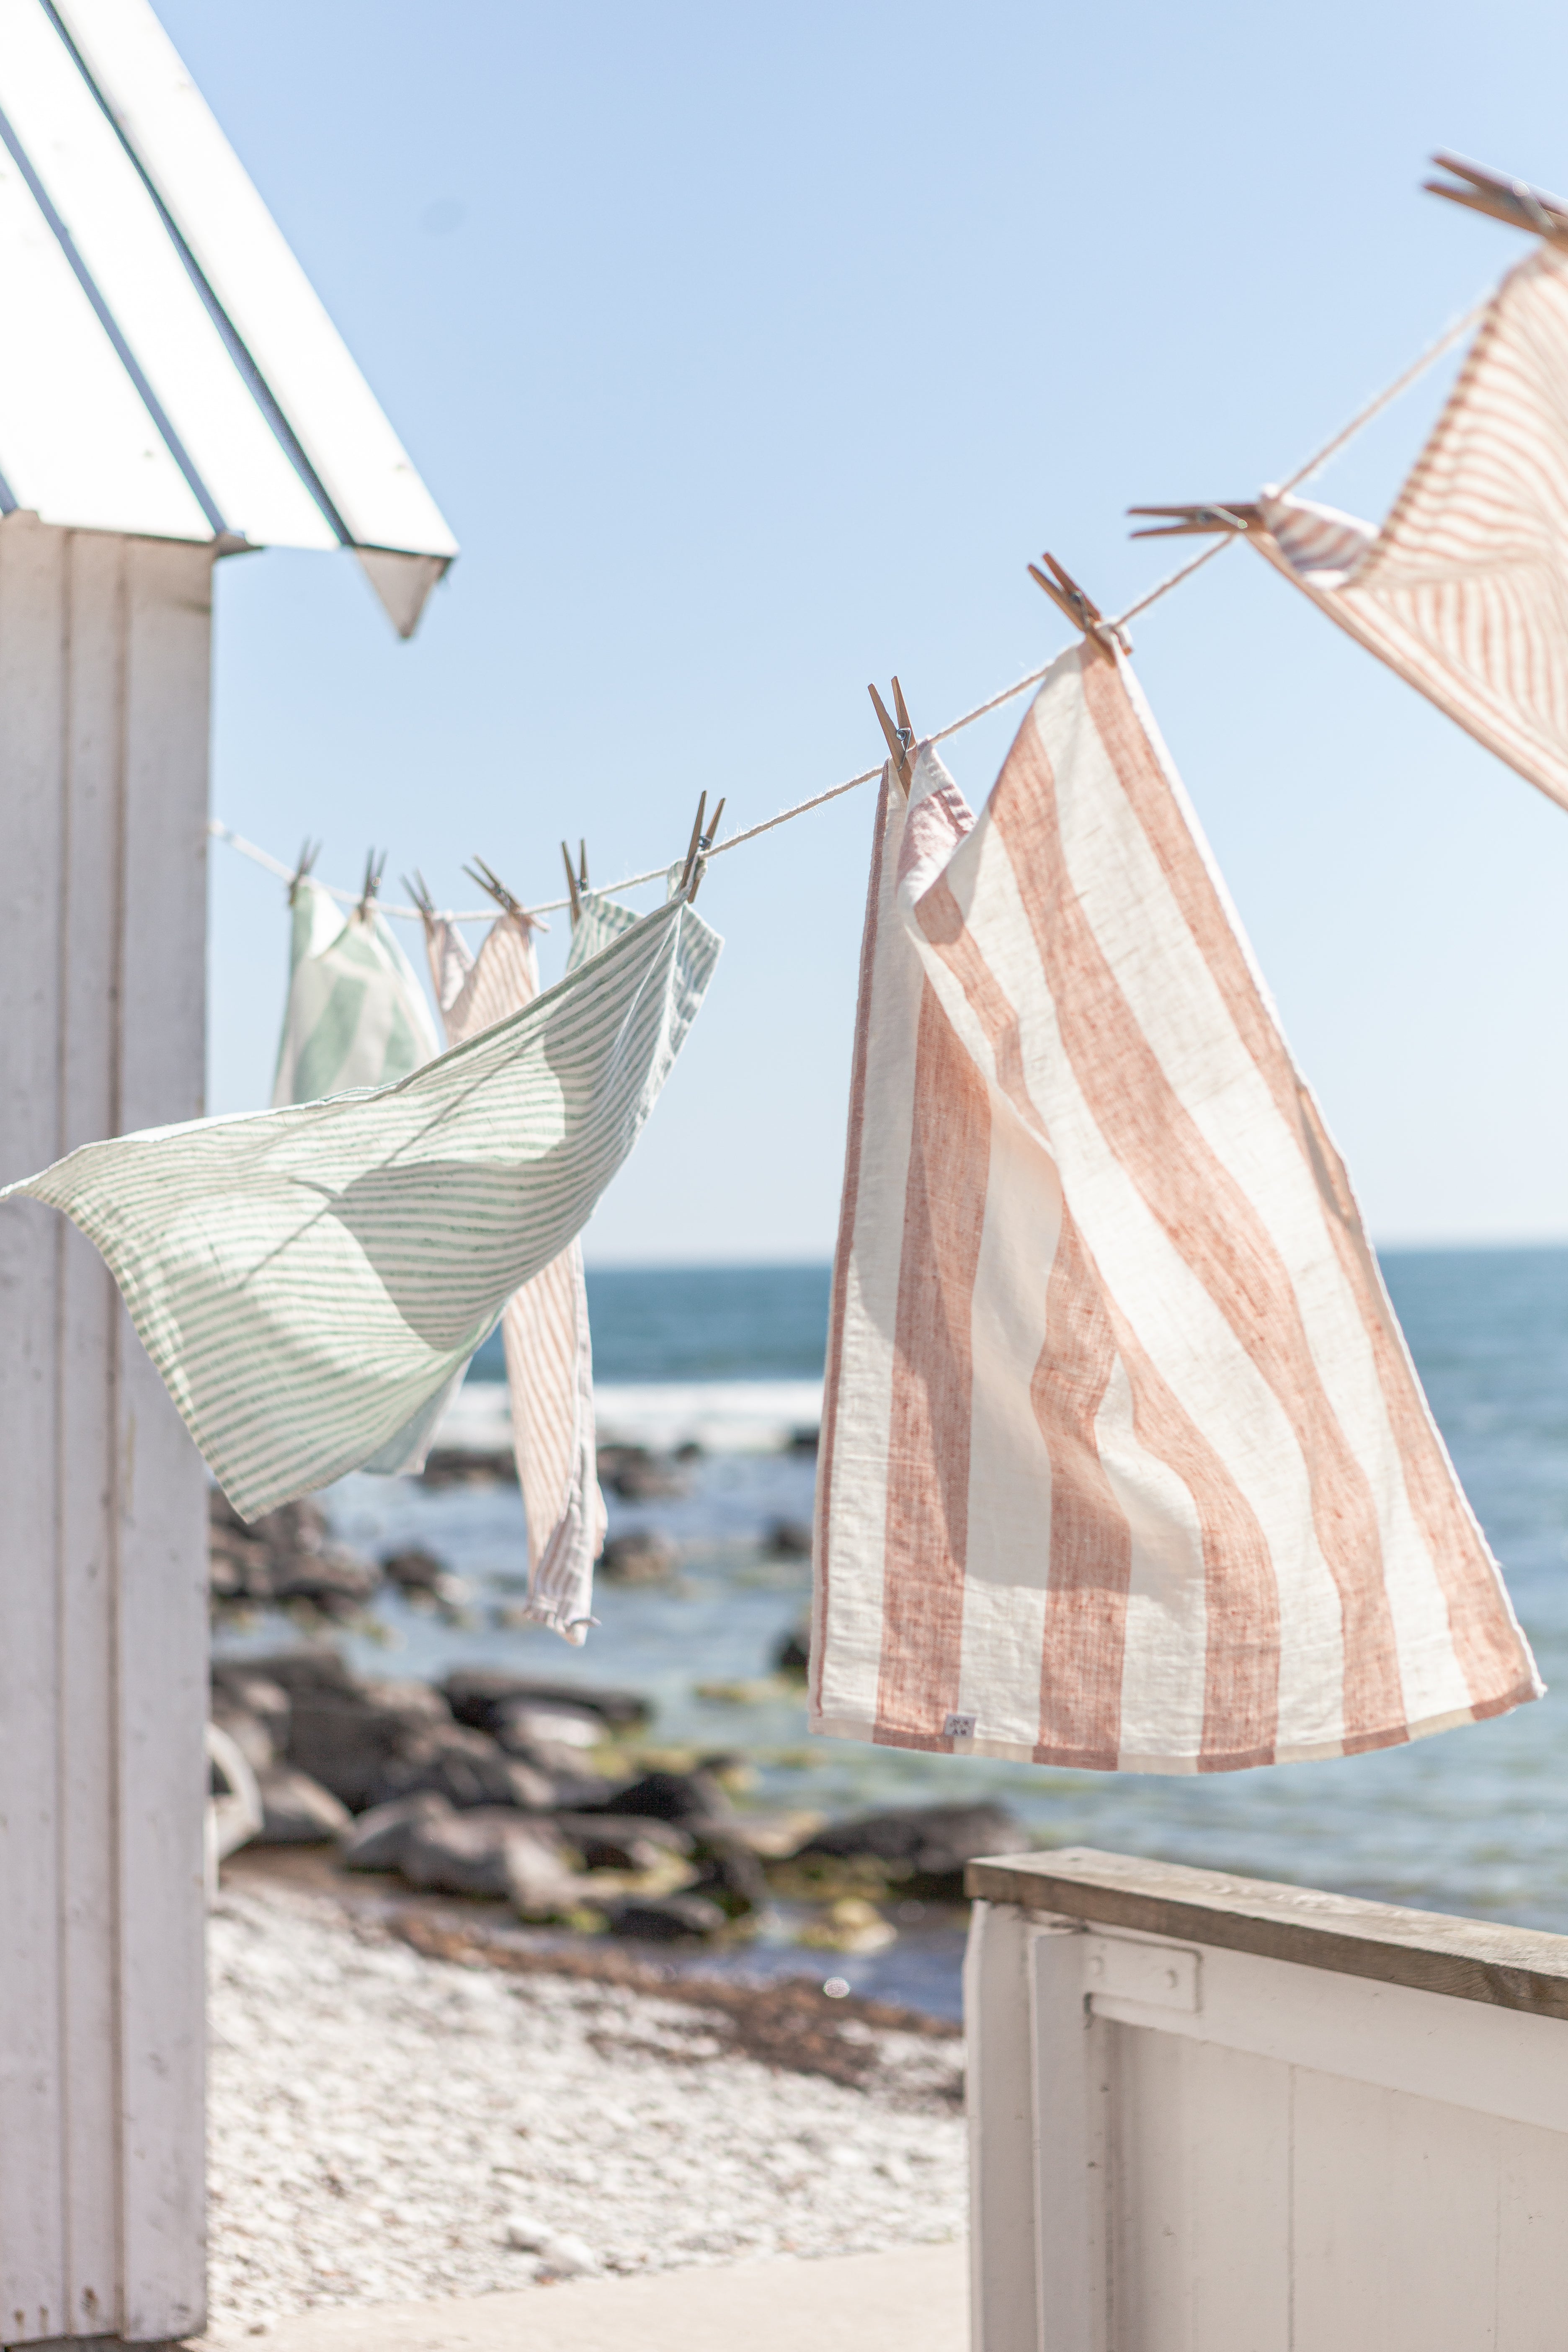 Pink striped linen towels